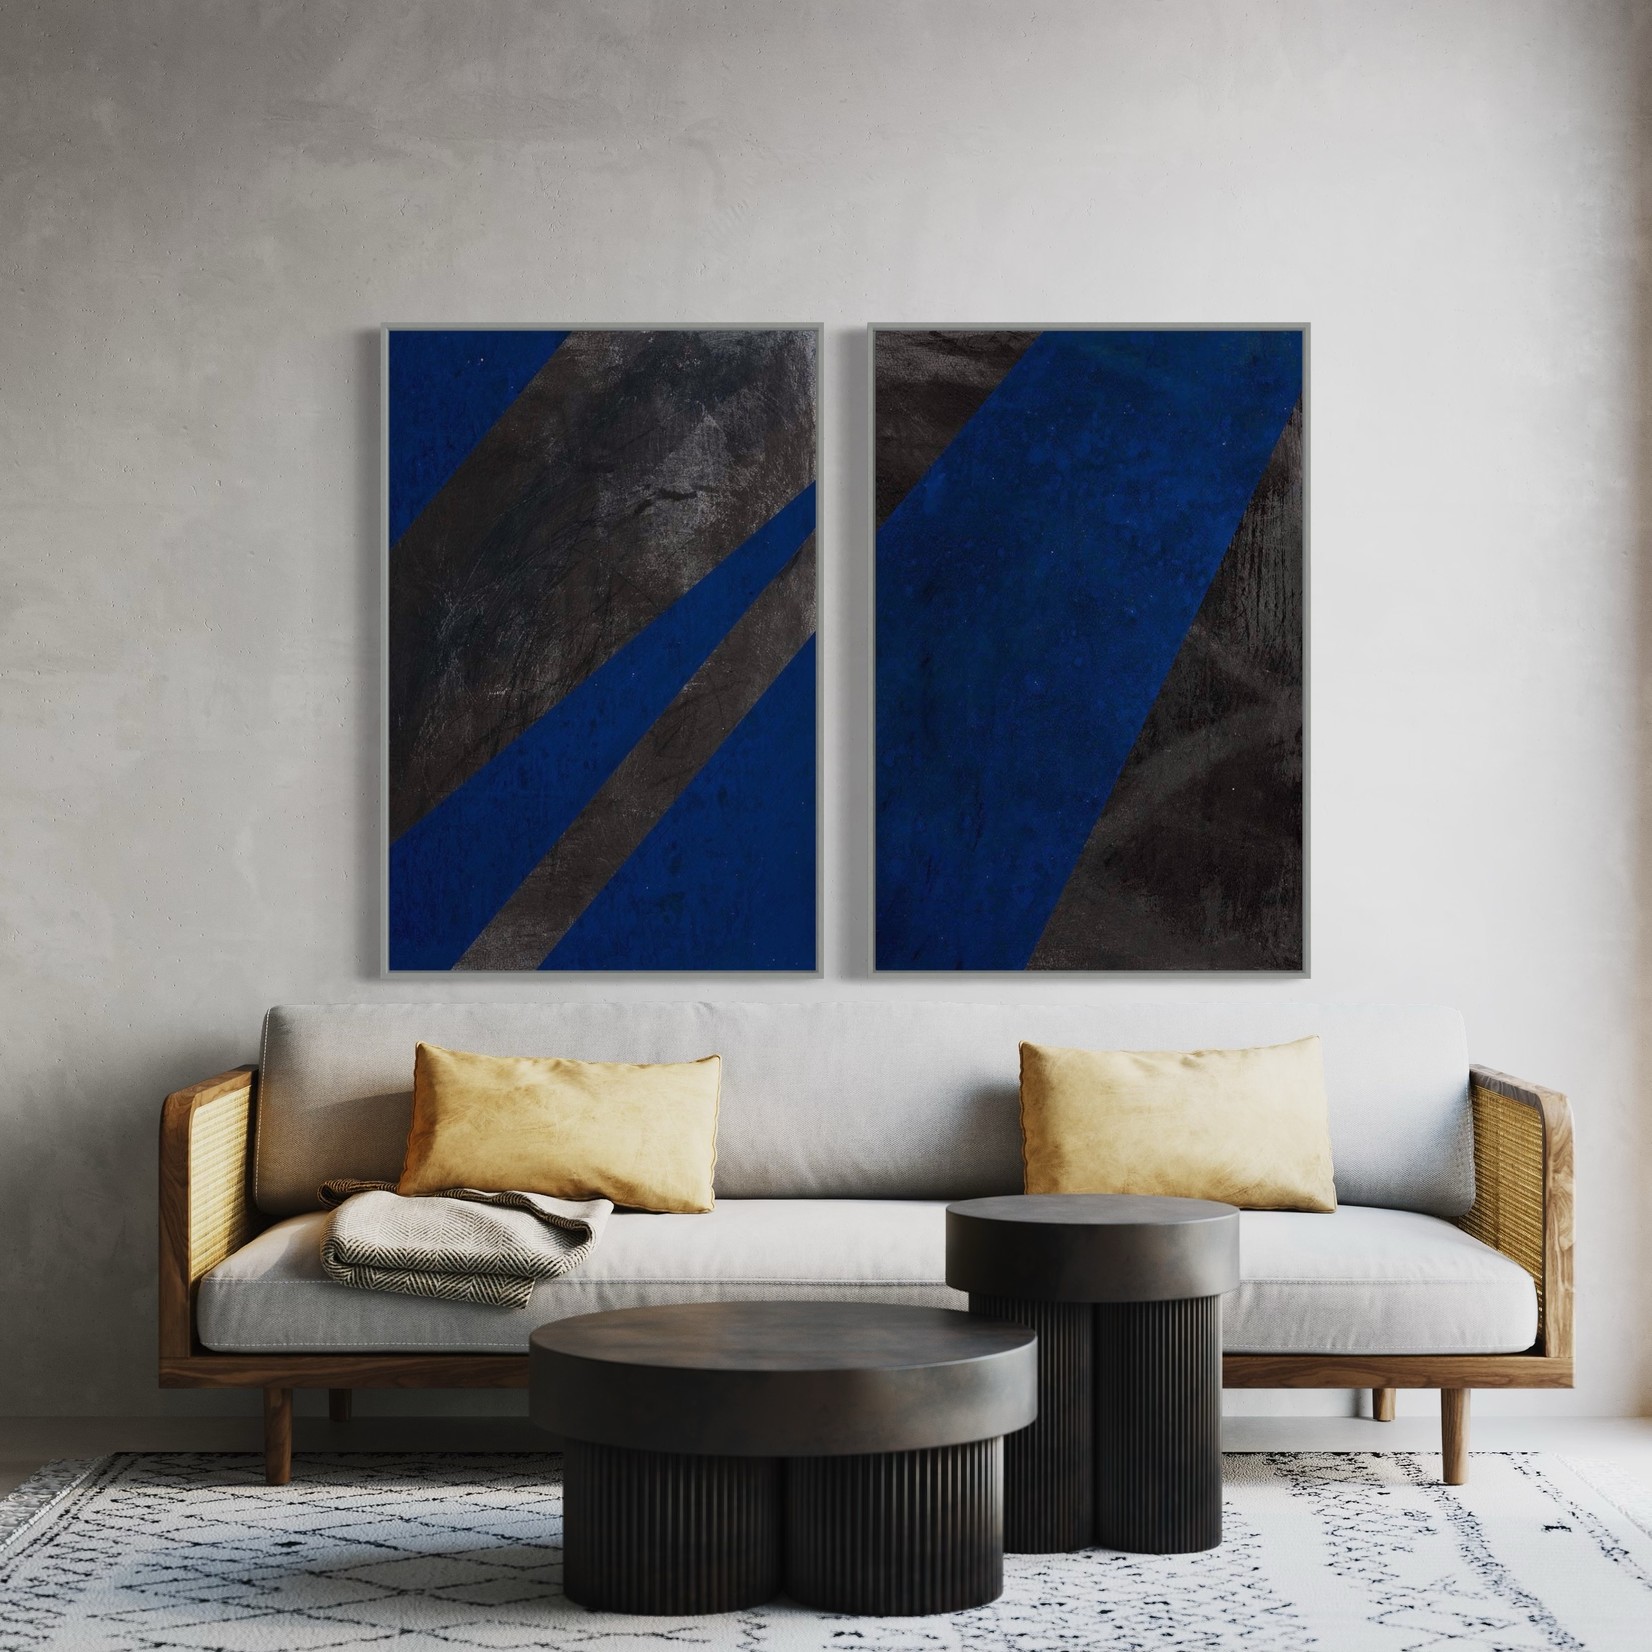 Framed Print on Canvas: Black and Blue 2 Canvas by Evelyn Ogly